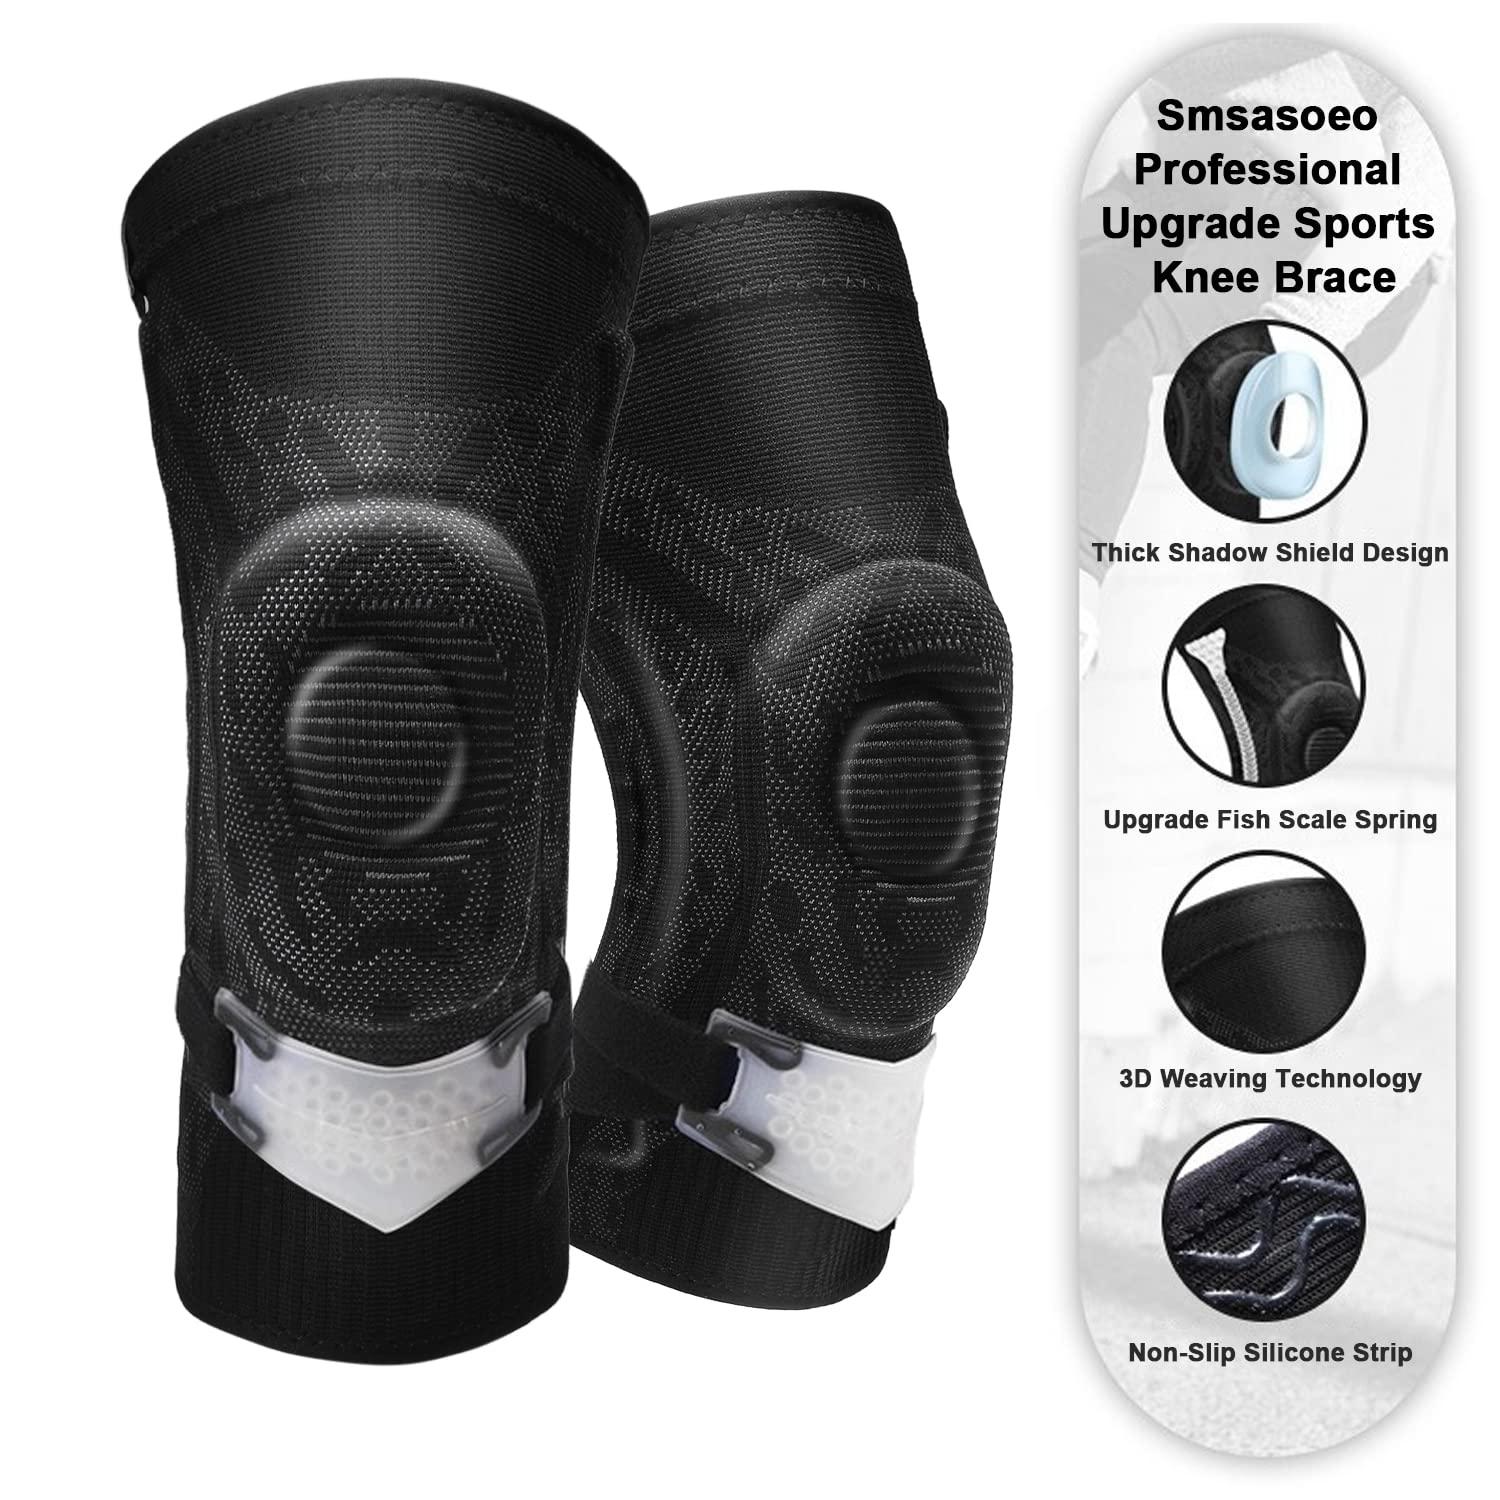 Fully Adjustable Sports Protective Knee Brace Support with Anti